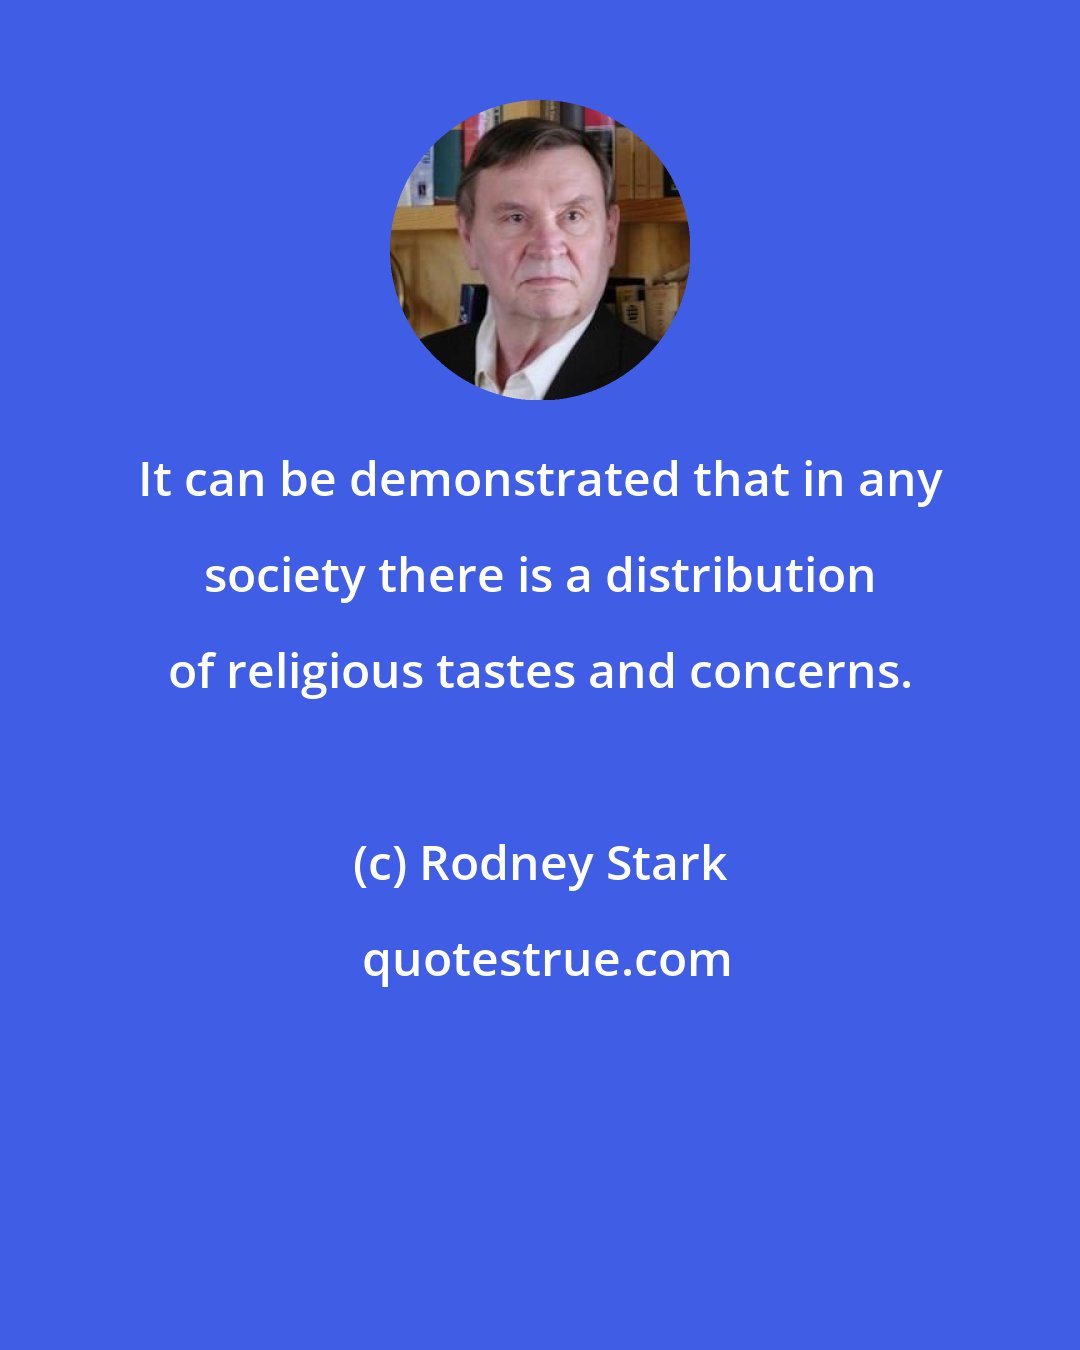 Rodney Stark: It can be demonstrated that in any society there is a distribution of religious tastes and concerns.